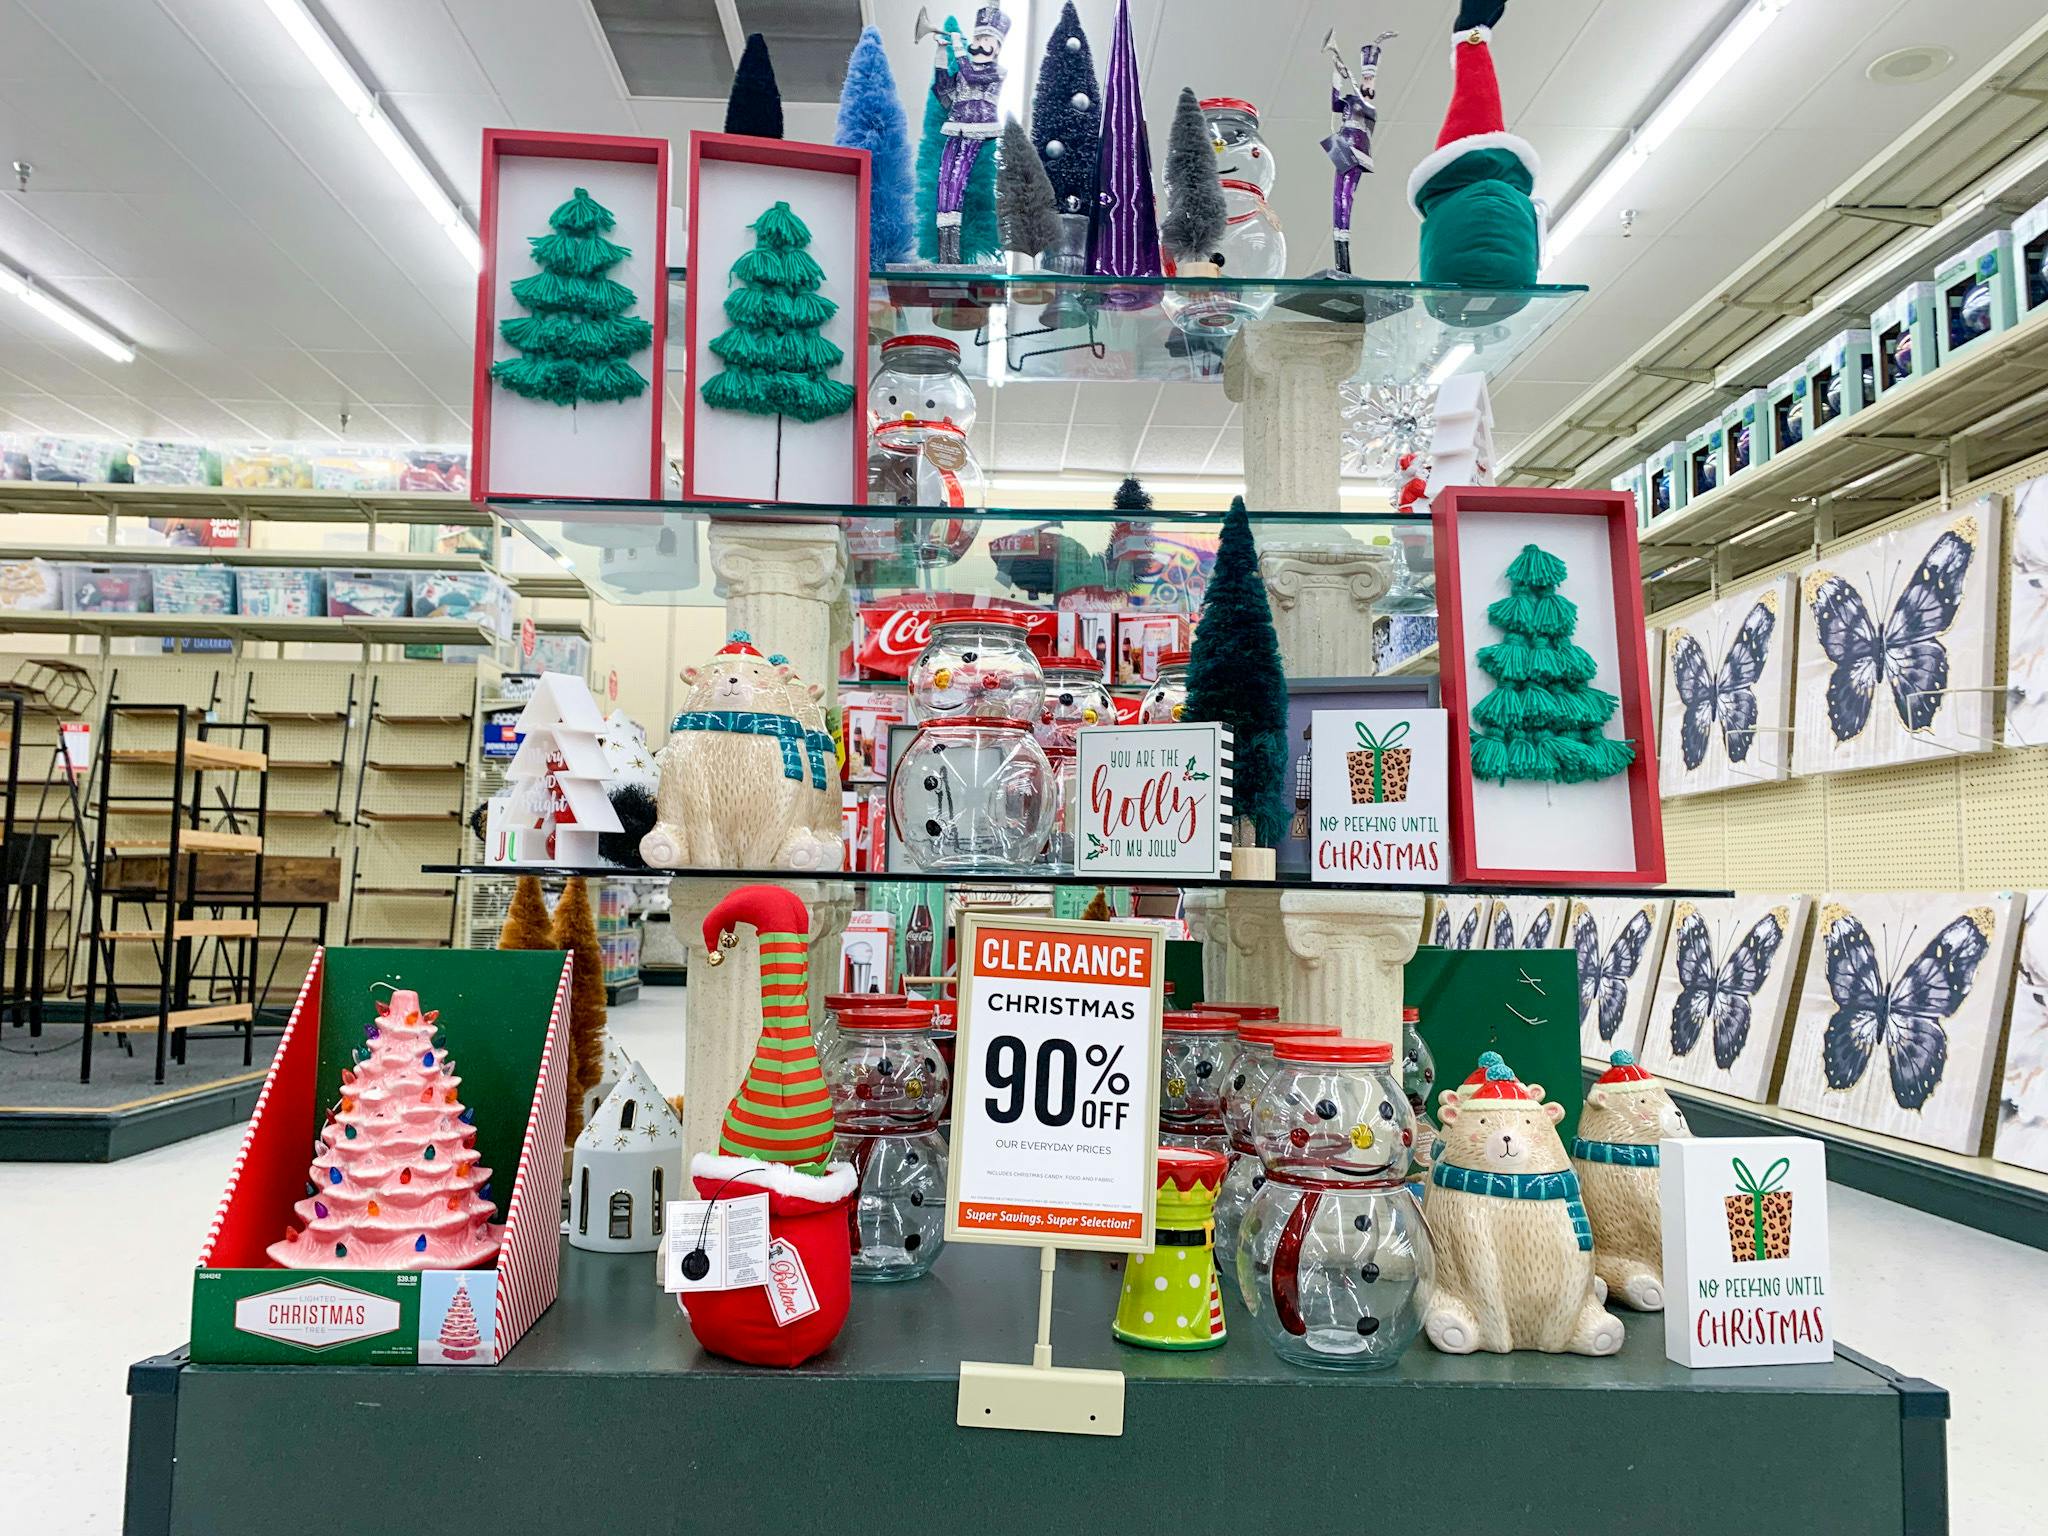 A Hobby Lobby Christmas clearance display with a 90% off sign in front.